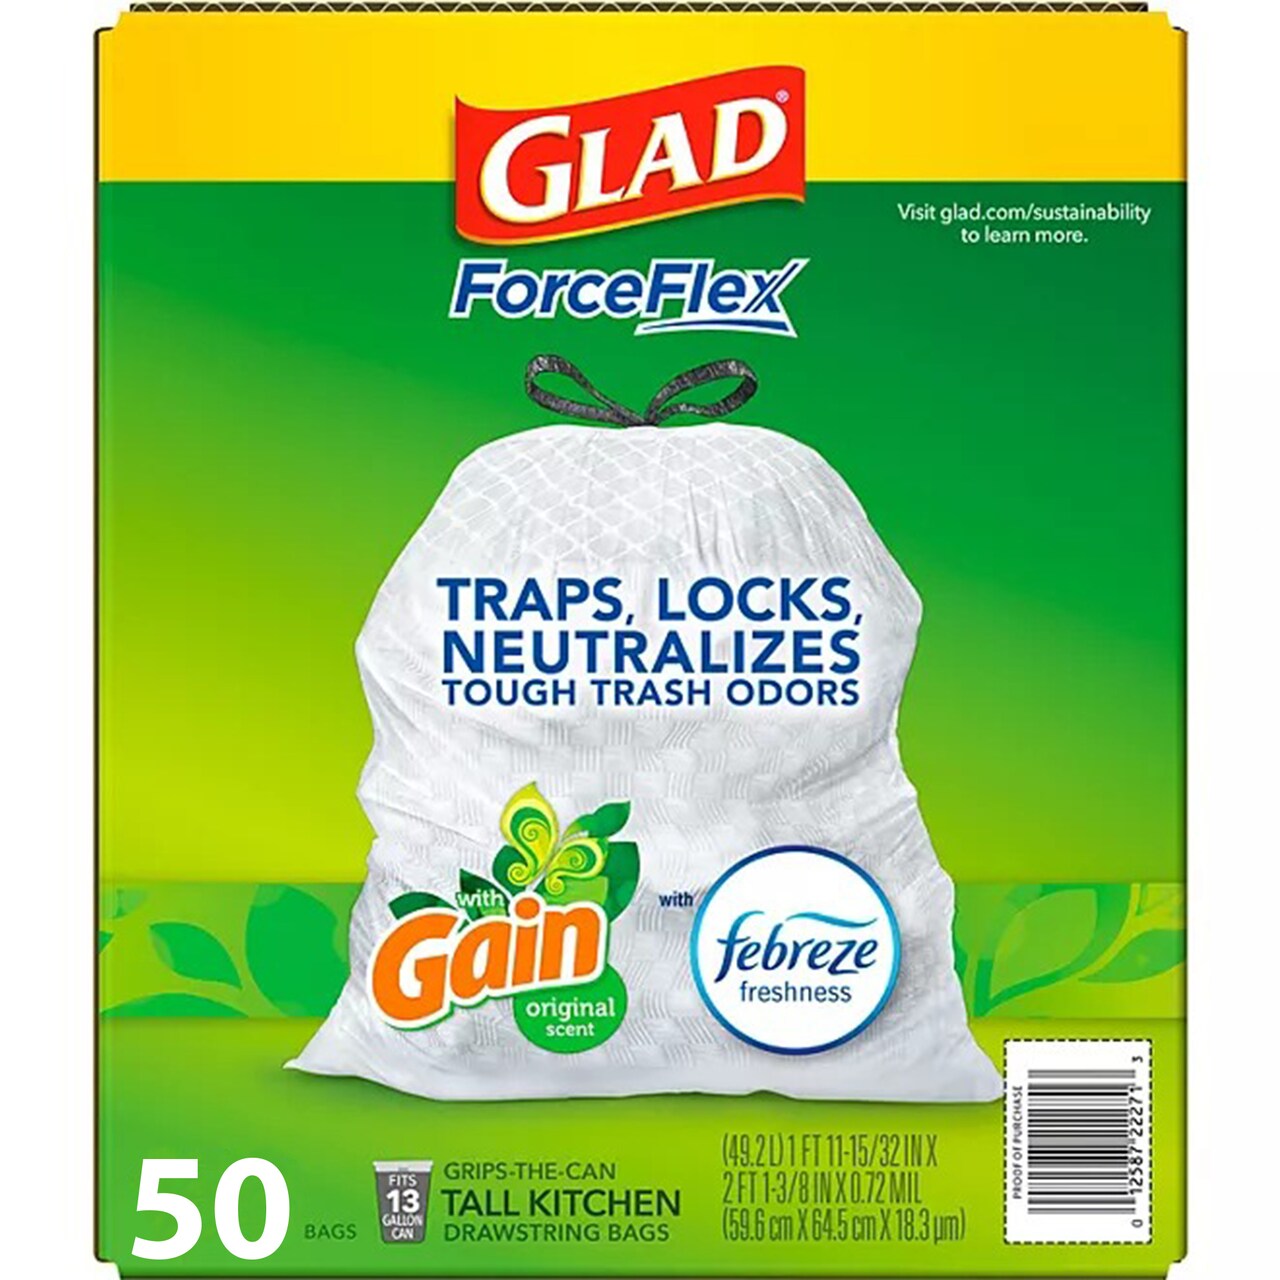 Glad ForceFlex Trash Bags Unrivaled Strength for a Mess-Free Life